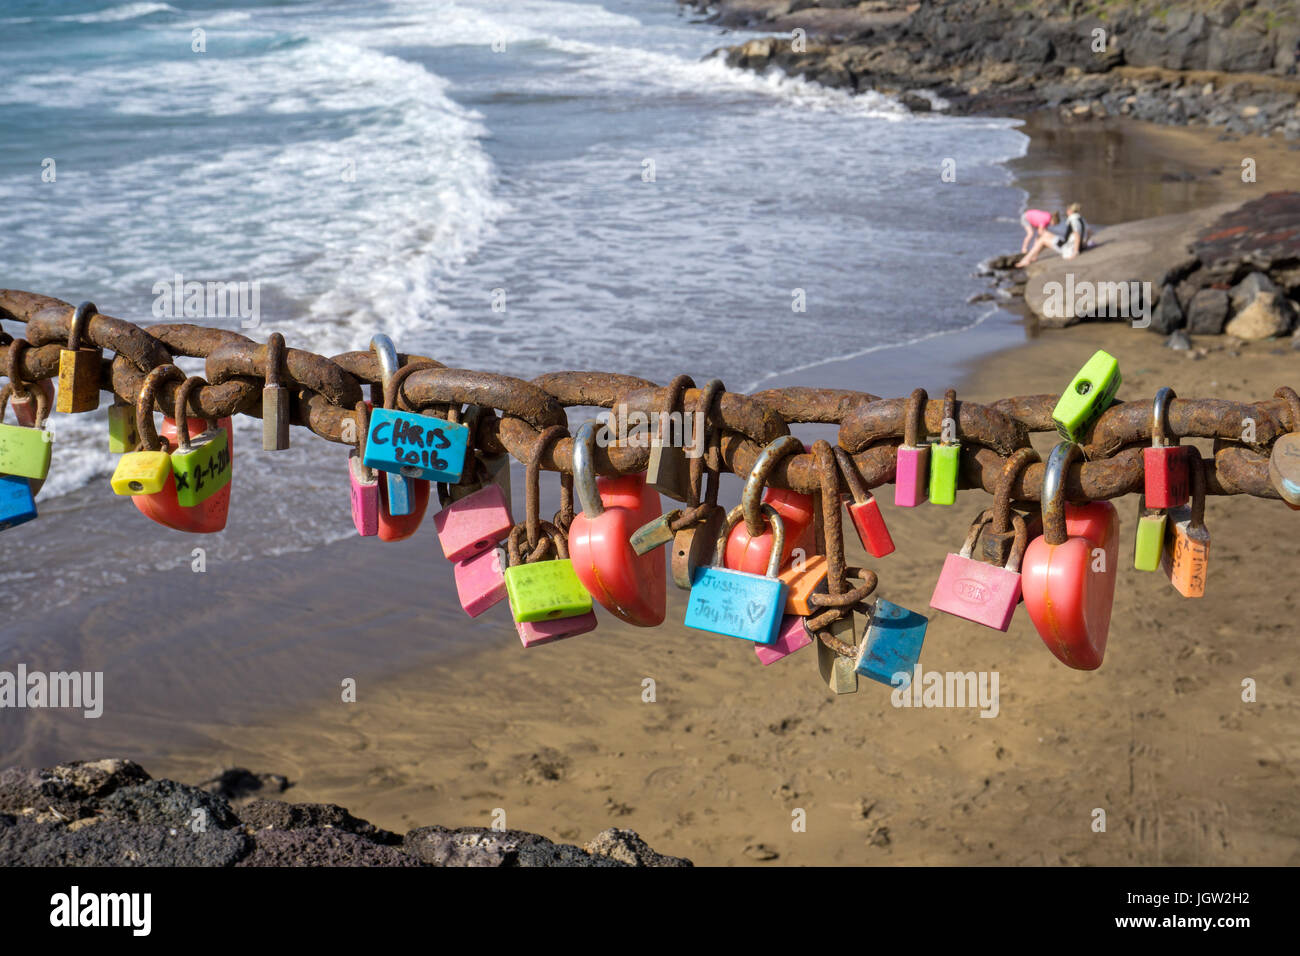 Love lockers hanging on chain at Playa Grande, large beach at Puerto del Carmen, Lanzarote island, Canary islands, Spain, Europe Stock Photo